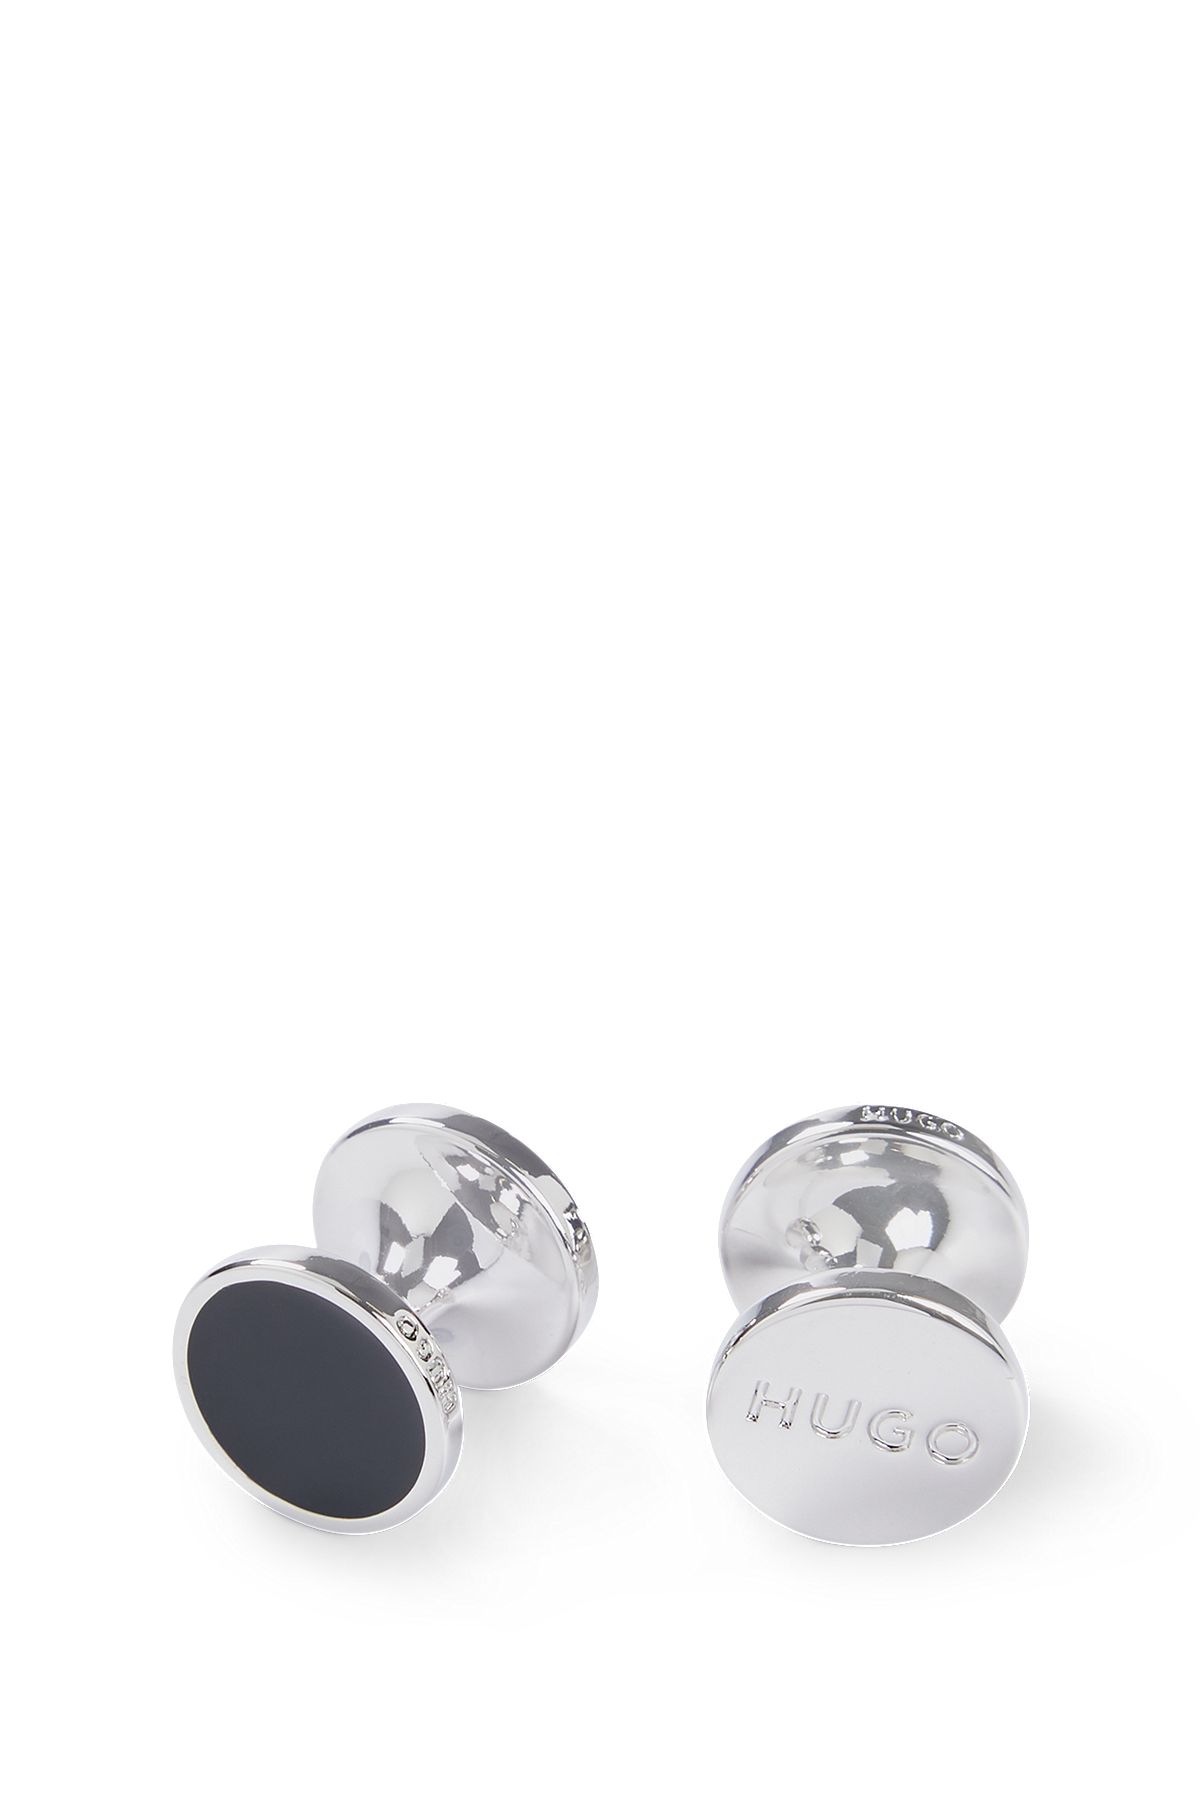 Round cufflinks with enamel core and logo, Black